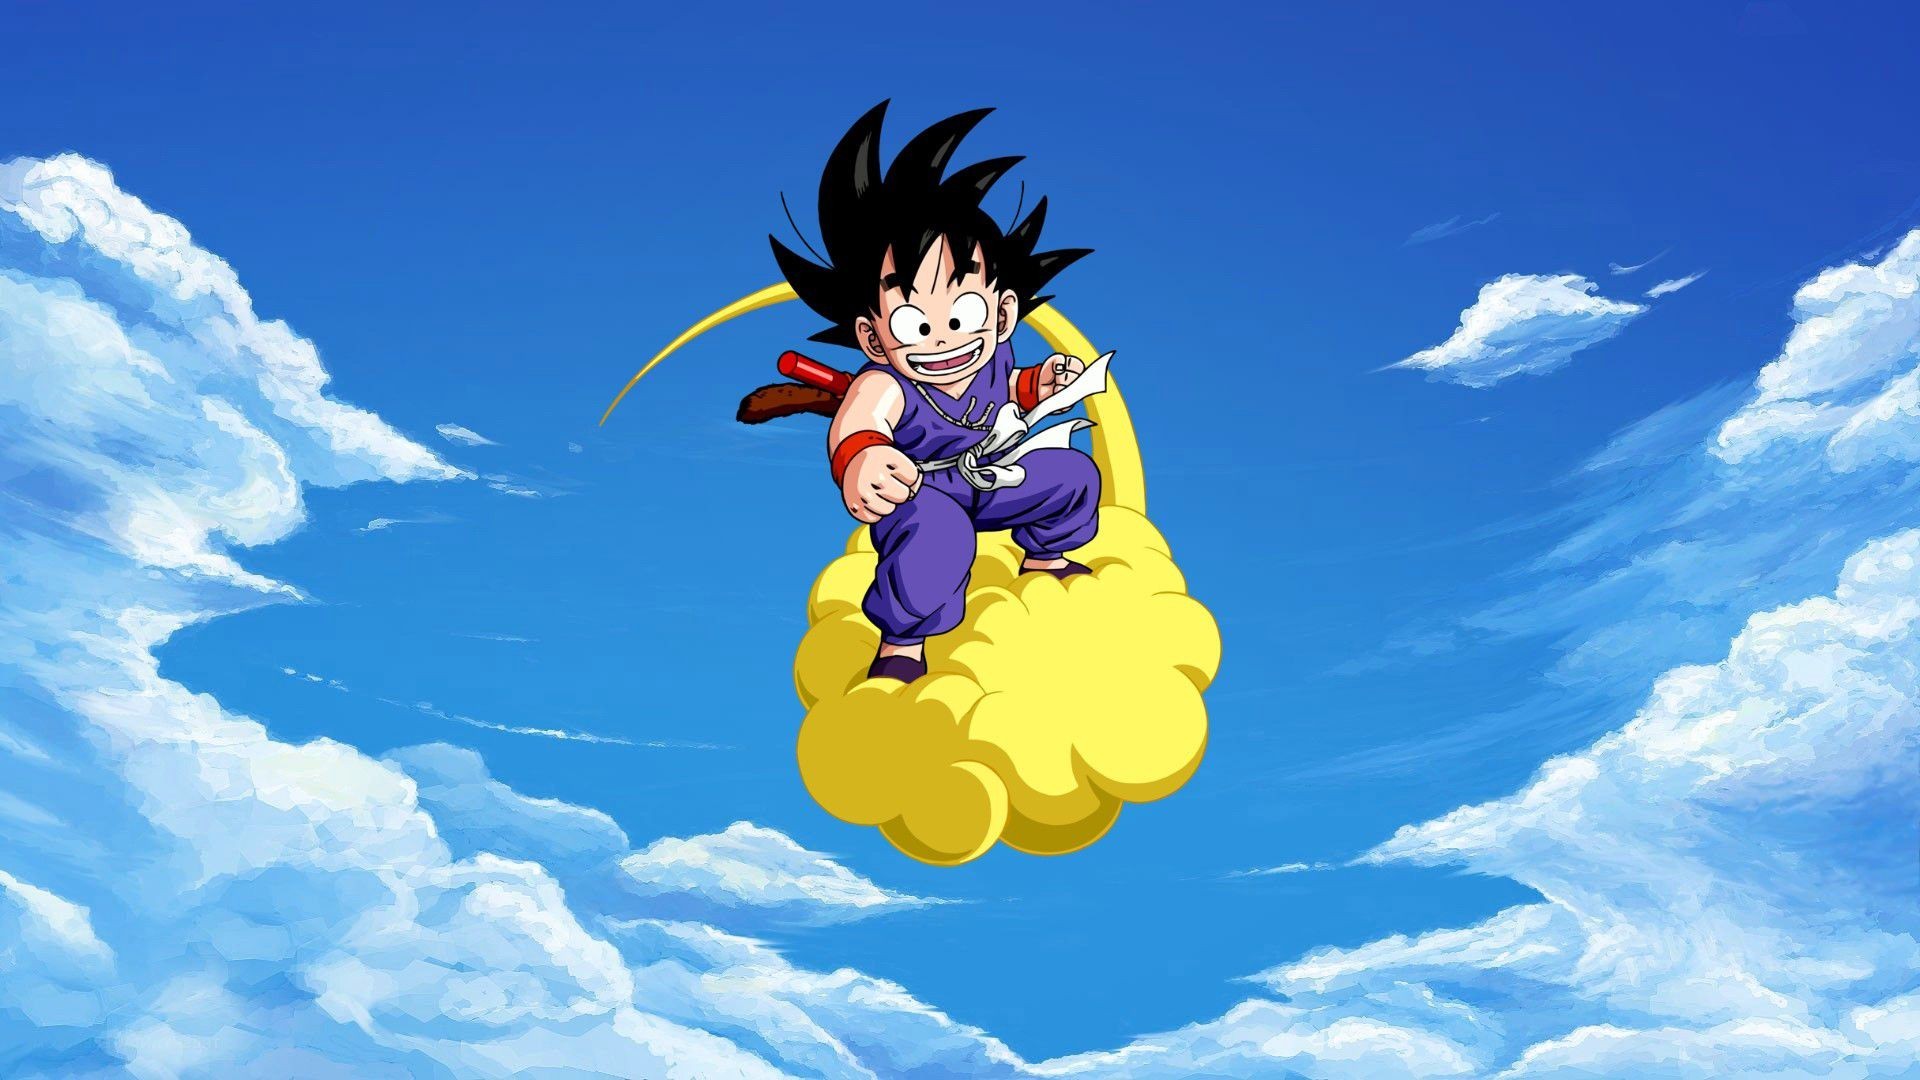 Wallpaper Kid Goku Desktop with resolution 1920X1080 pixel. You can use this wallpaper as background for your desktop Computer Screensavers, Android or iPhone smartphones